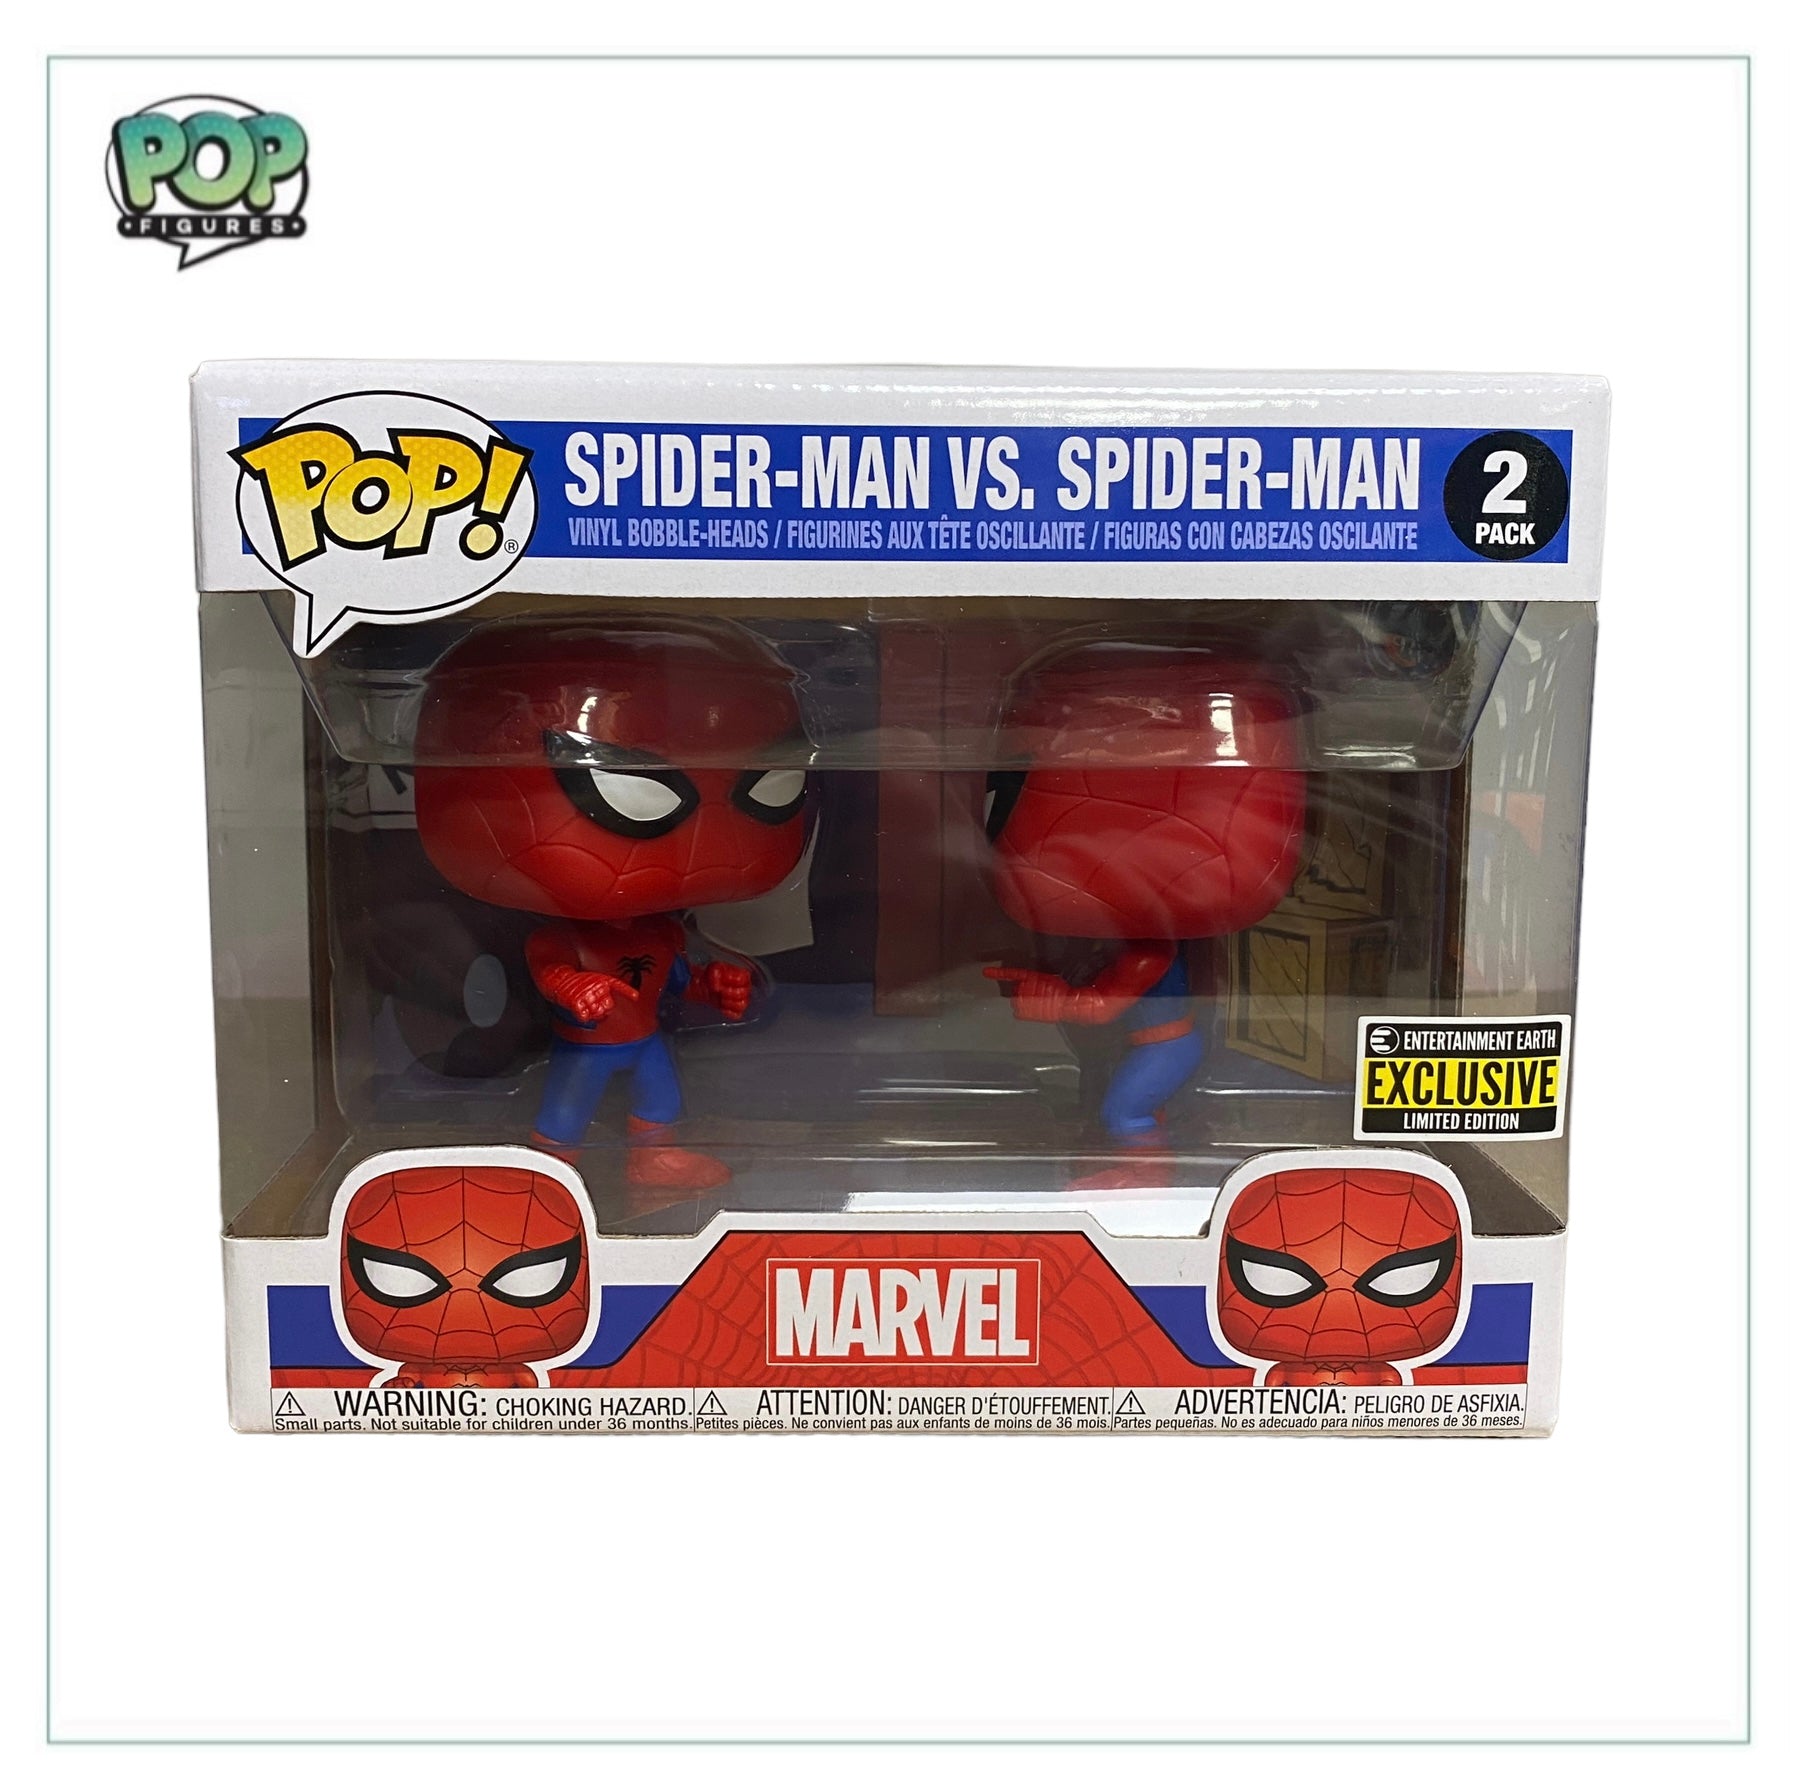 Spider-Man vs. Spider-Man 2 Pack Funko Pop! - Marvel - Entertainment Earth Exclusive